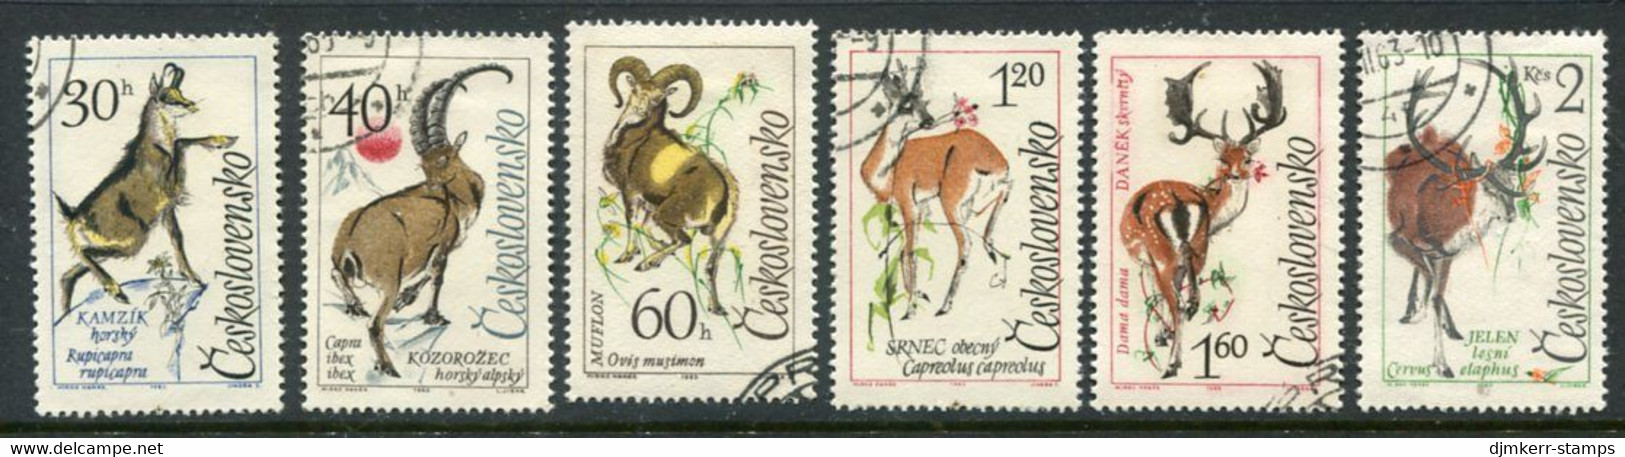 CZECHOSLOVAKIA 1963 Mountain Animals Used.  Michel 1441-46 - Used Stamps